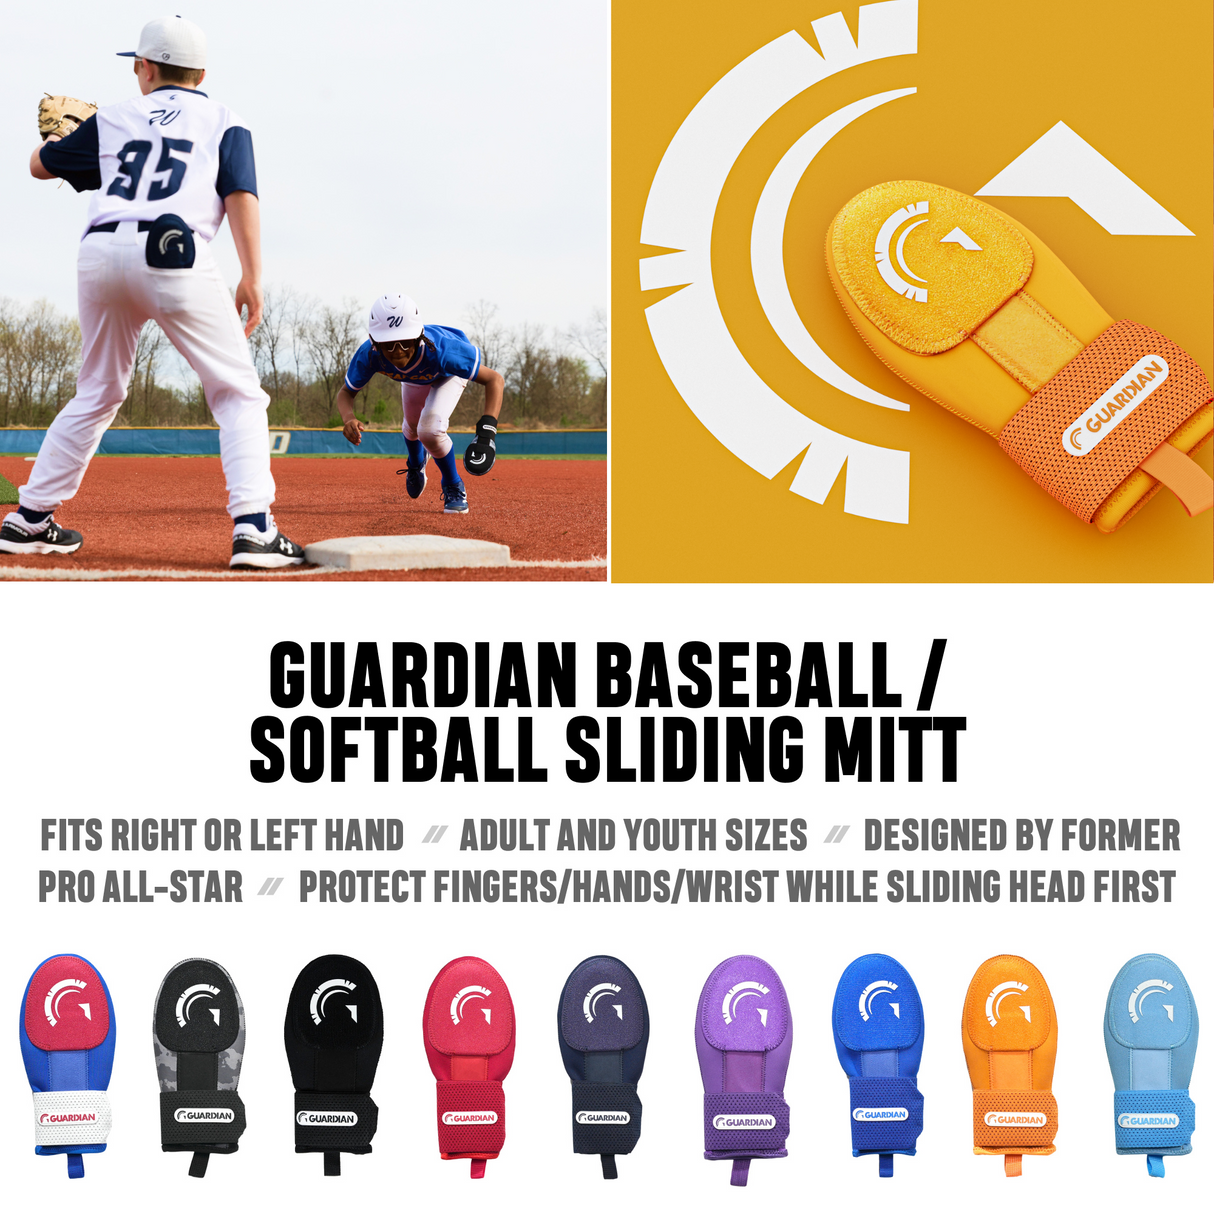 Why Do Baseball Players Wear Mitts? What Is a Sliding Mitt?